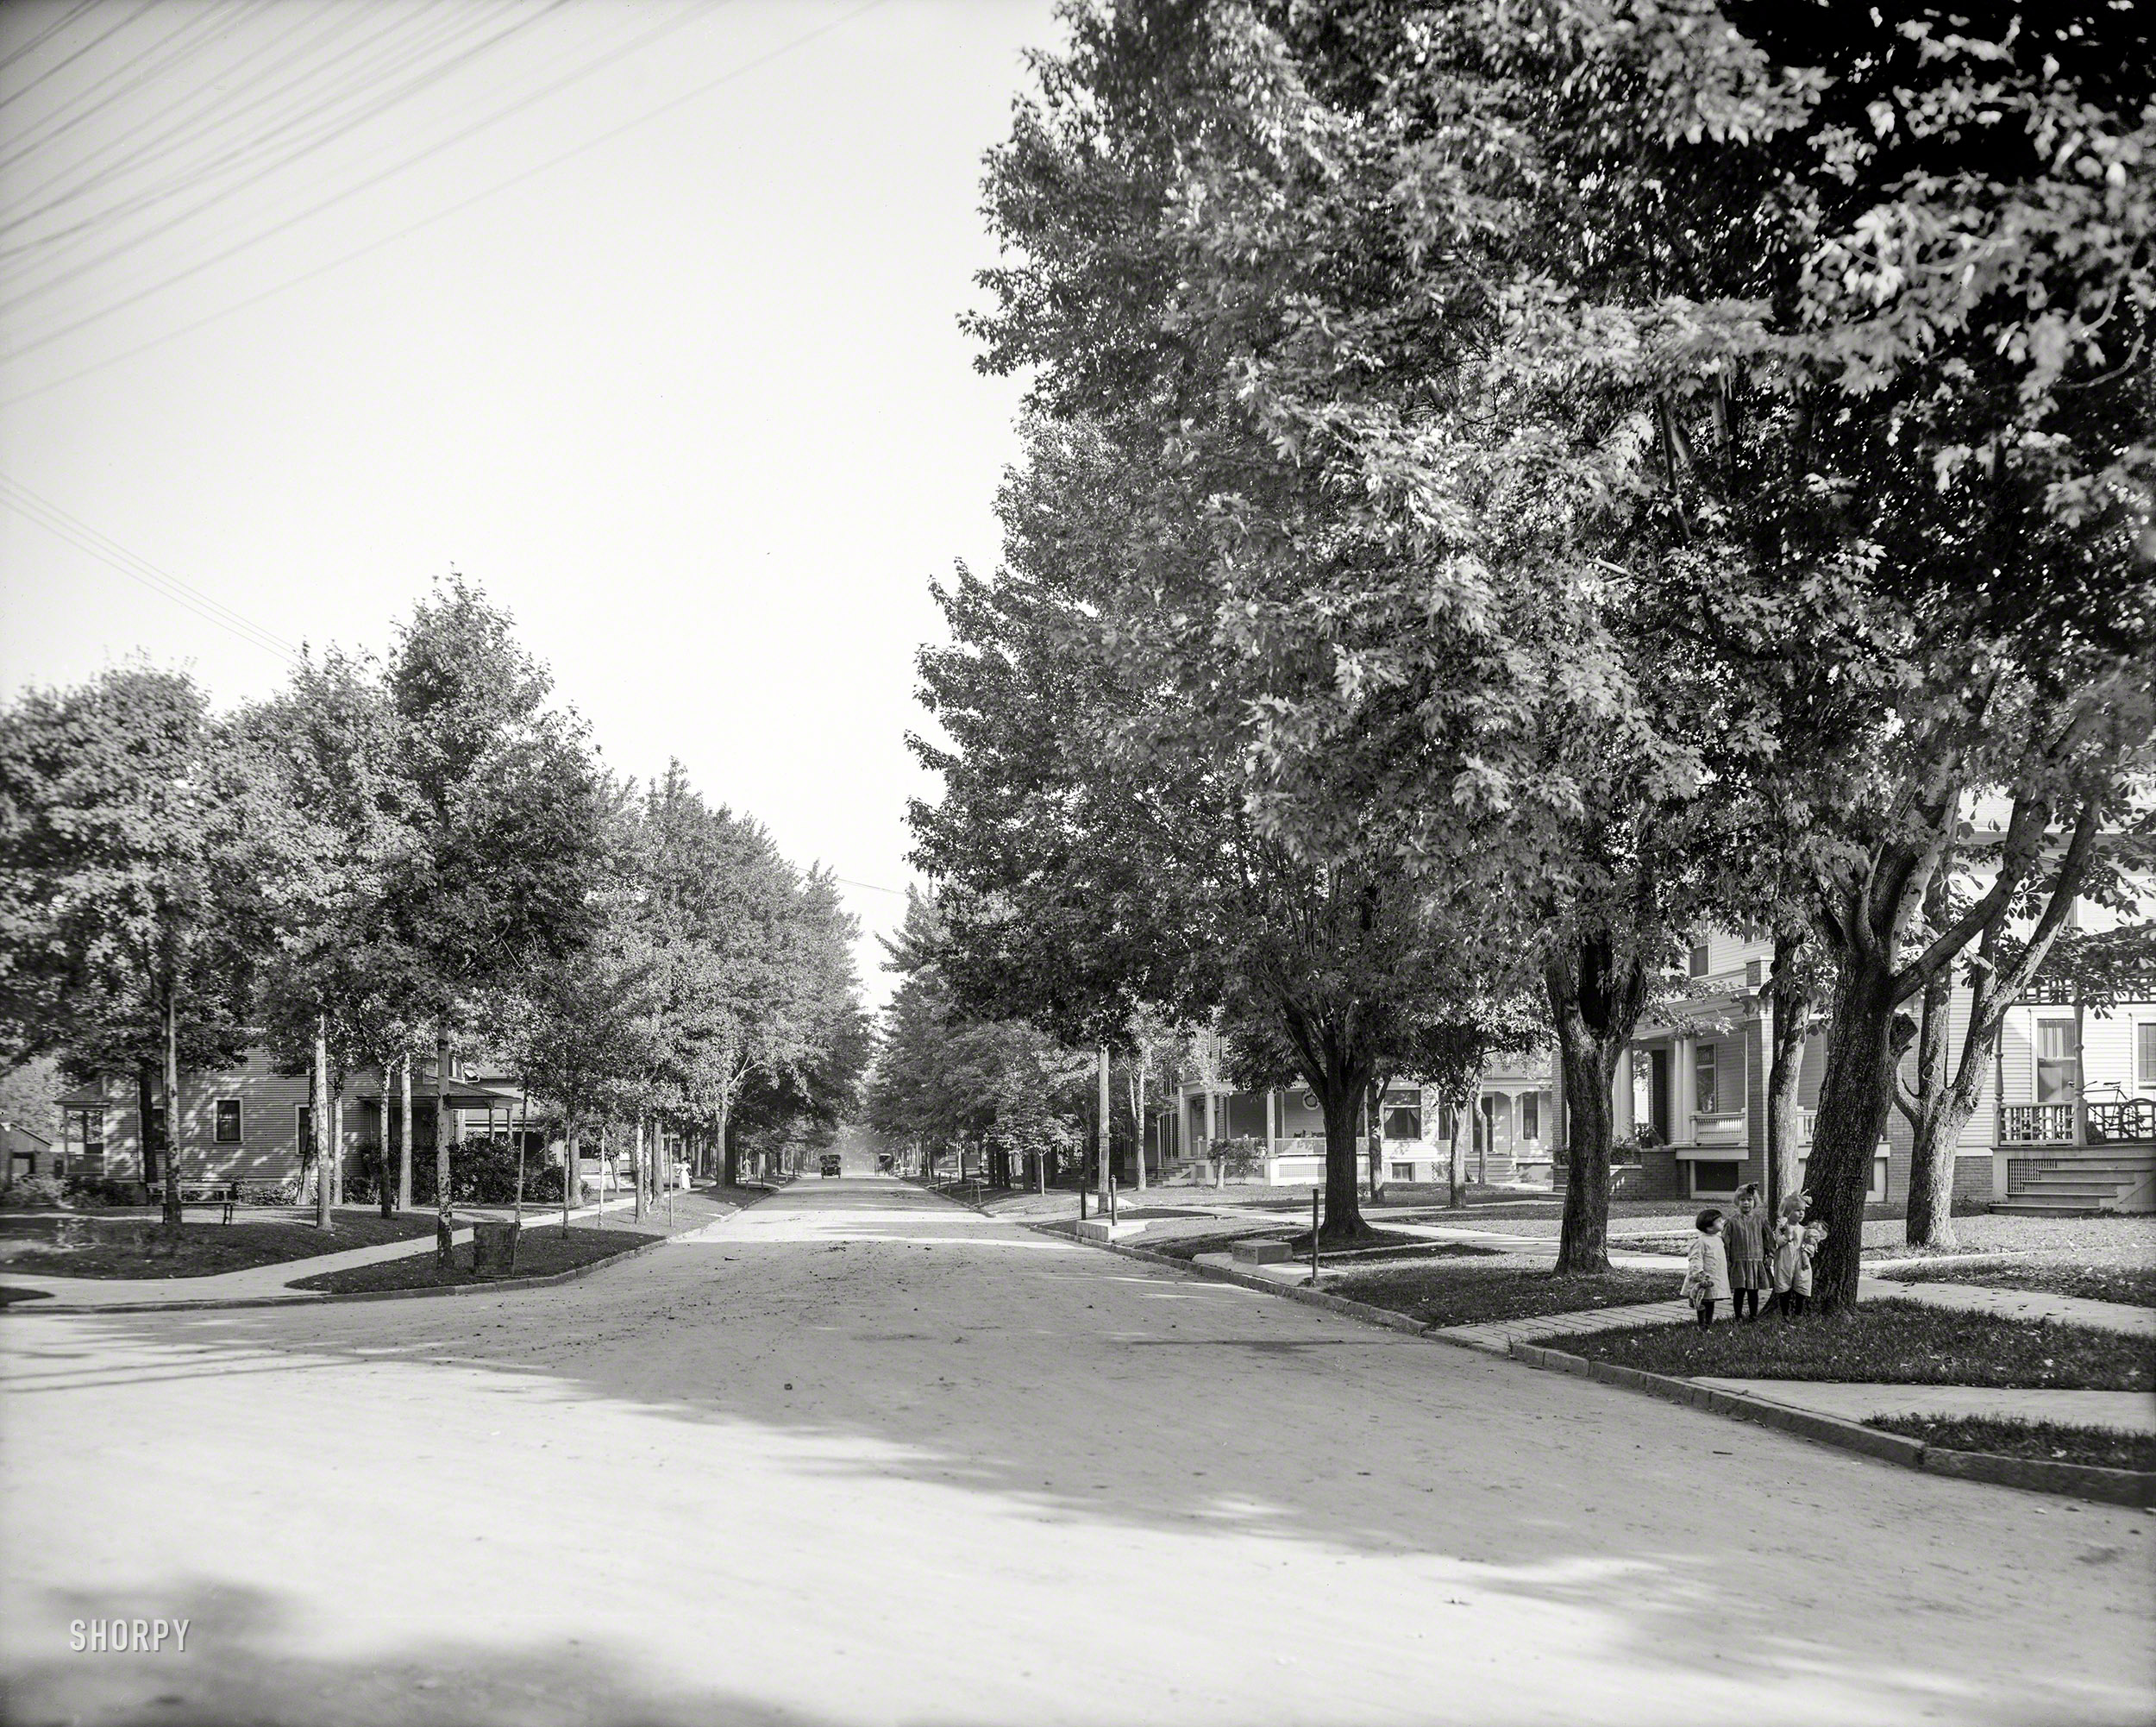 Saginaw, Michigan, circa 1908. "Houses on South Weadock Avenue." 8x10 inch dry plate glass negative, Detroit Publishing Company. View full size.